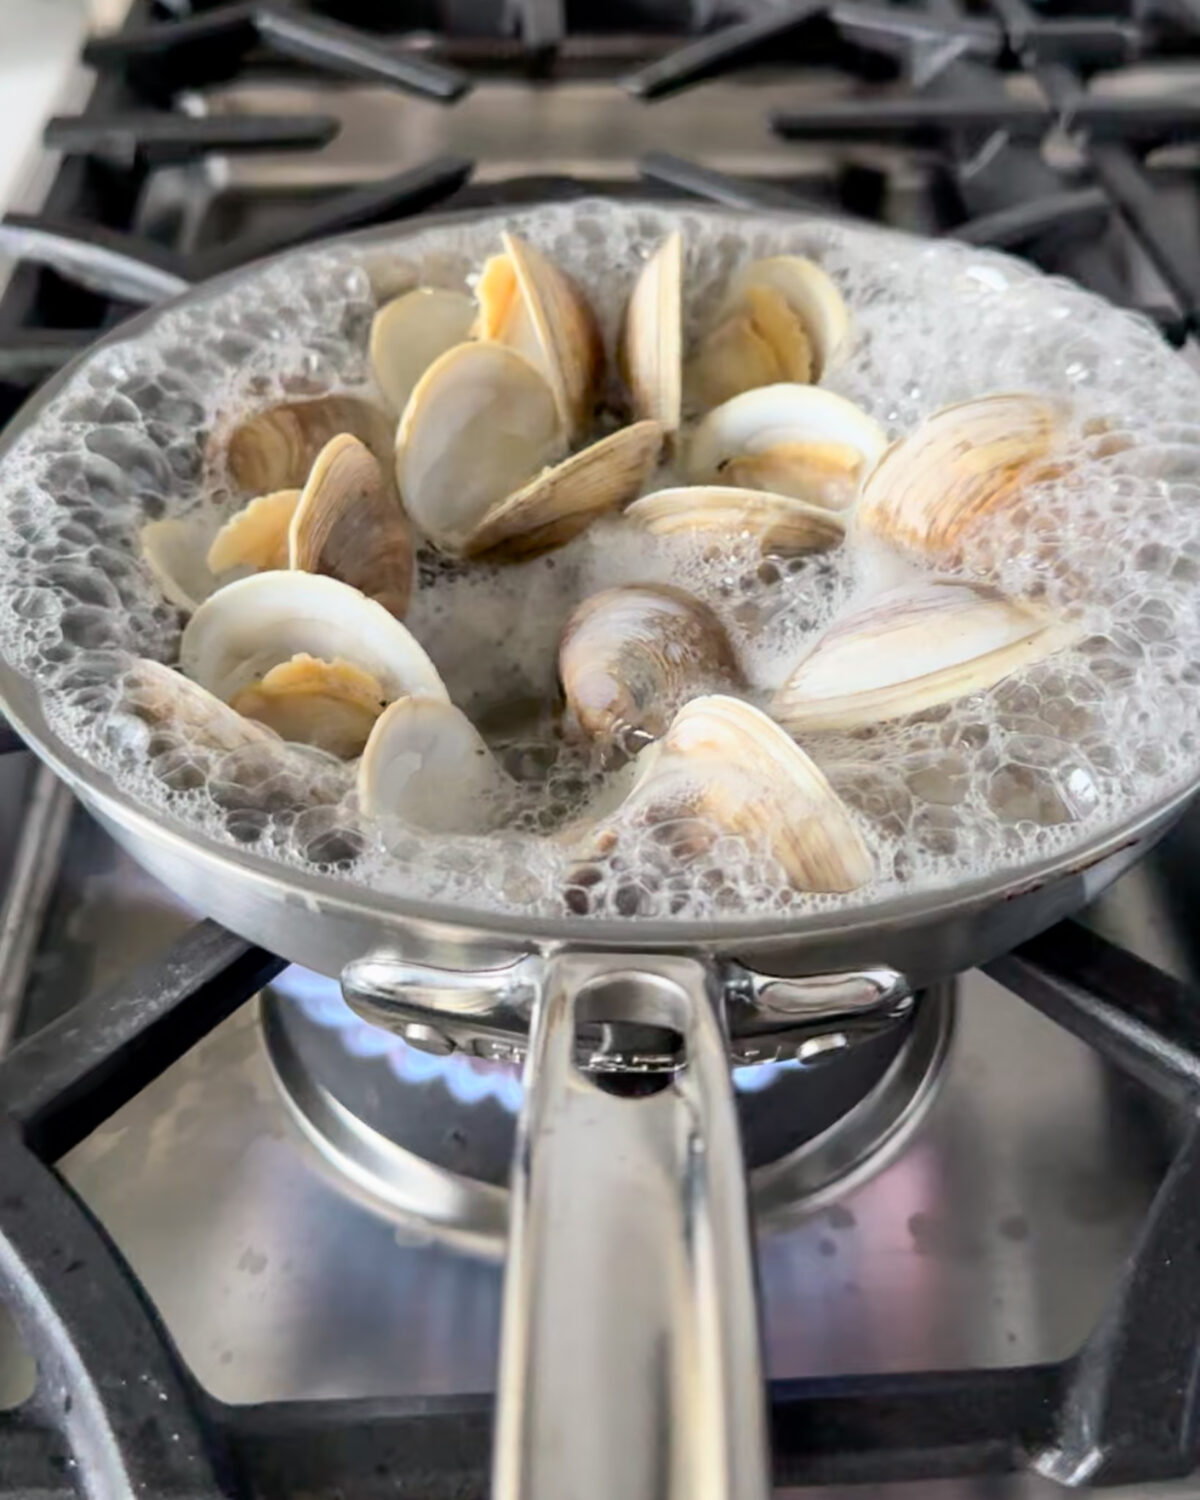 Steam the clams in white wine or water.